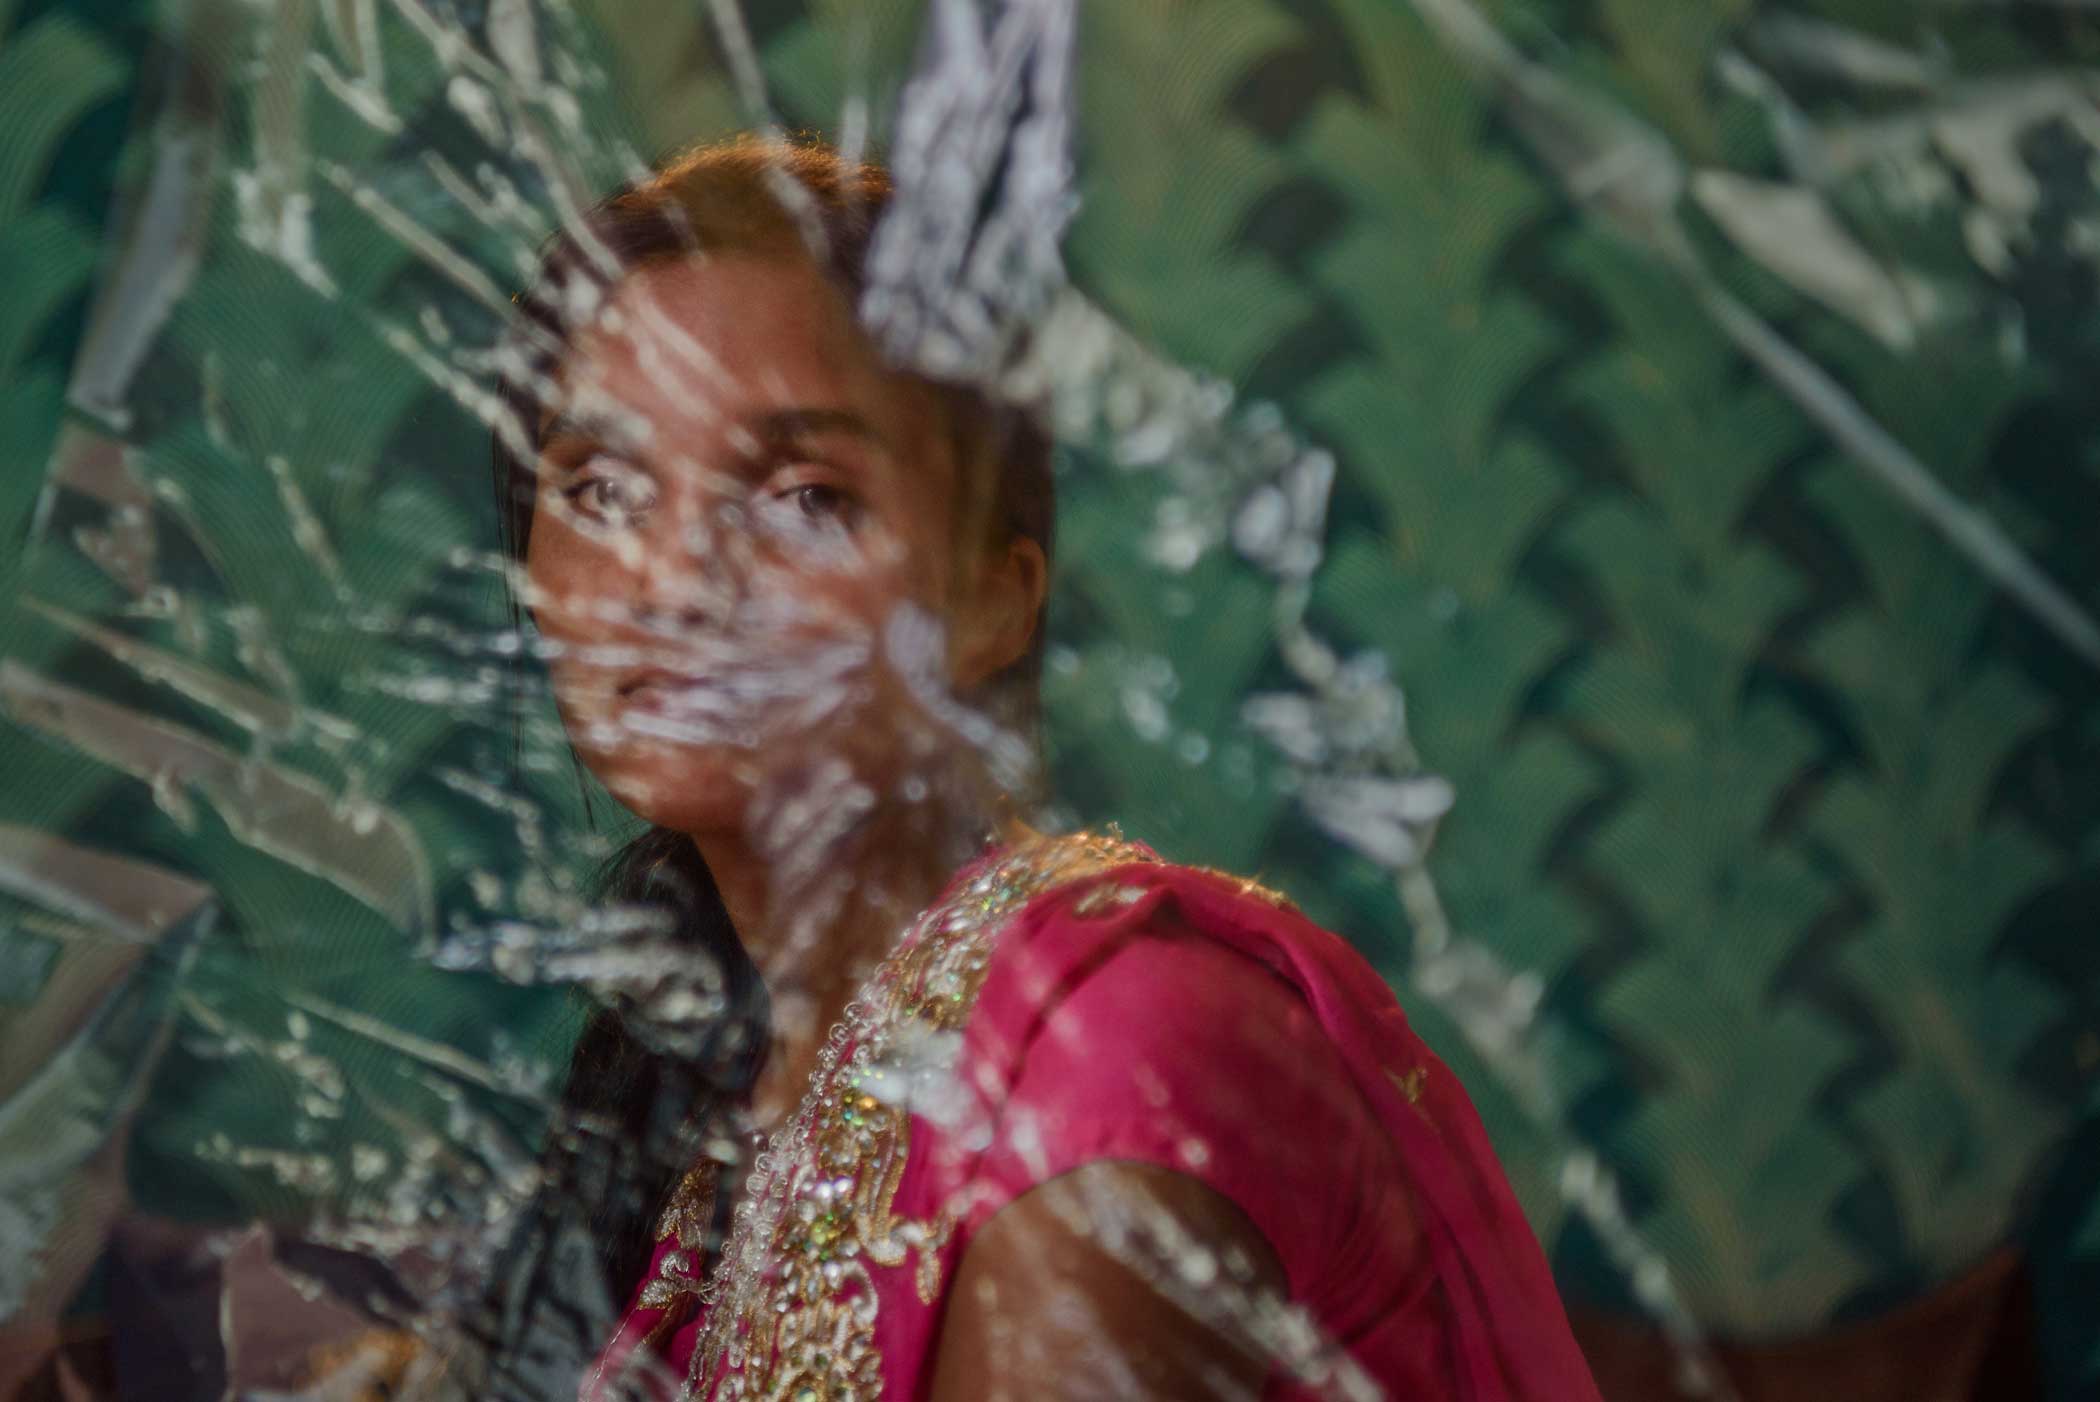 Mansi, 13, was trafficked by a man from her neighboring village in northern Uttar Pradesh. She was raped by her trafficker behind a railway station in Maharashtra in 2012. The man belongs to the Yadav community and has financial influence. Mansi ran away from her trafficker before he could sell her to a brothel. She reported the incident to the railway police. Instead of taking action on her behalf, Mansi was held in custody for 12 days while the perpetrator and his family tried to get her to retract her complaint. (Smita_Sharma)